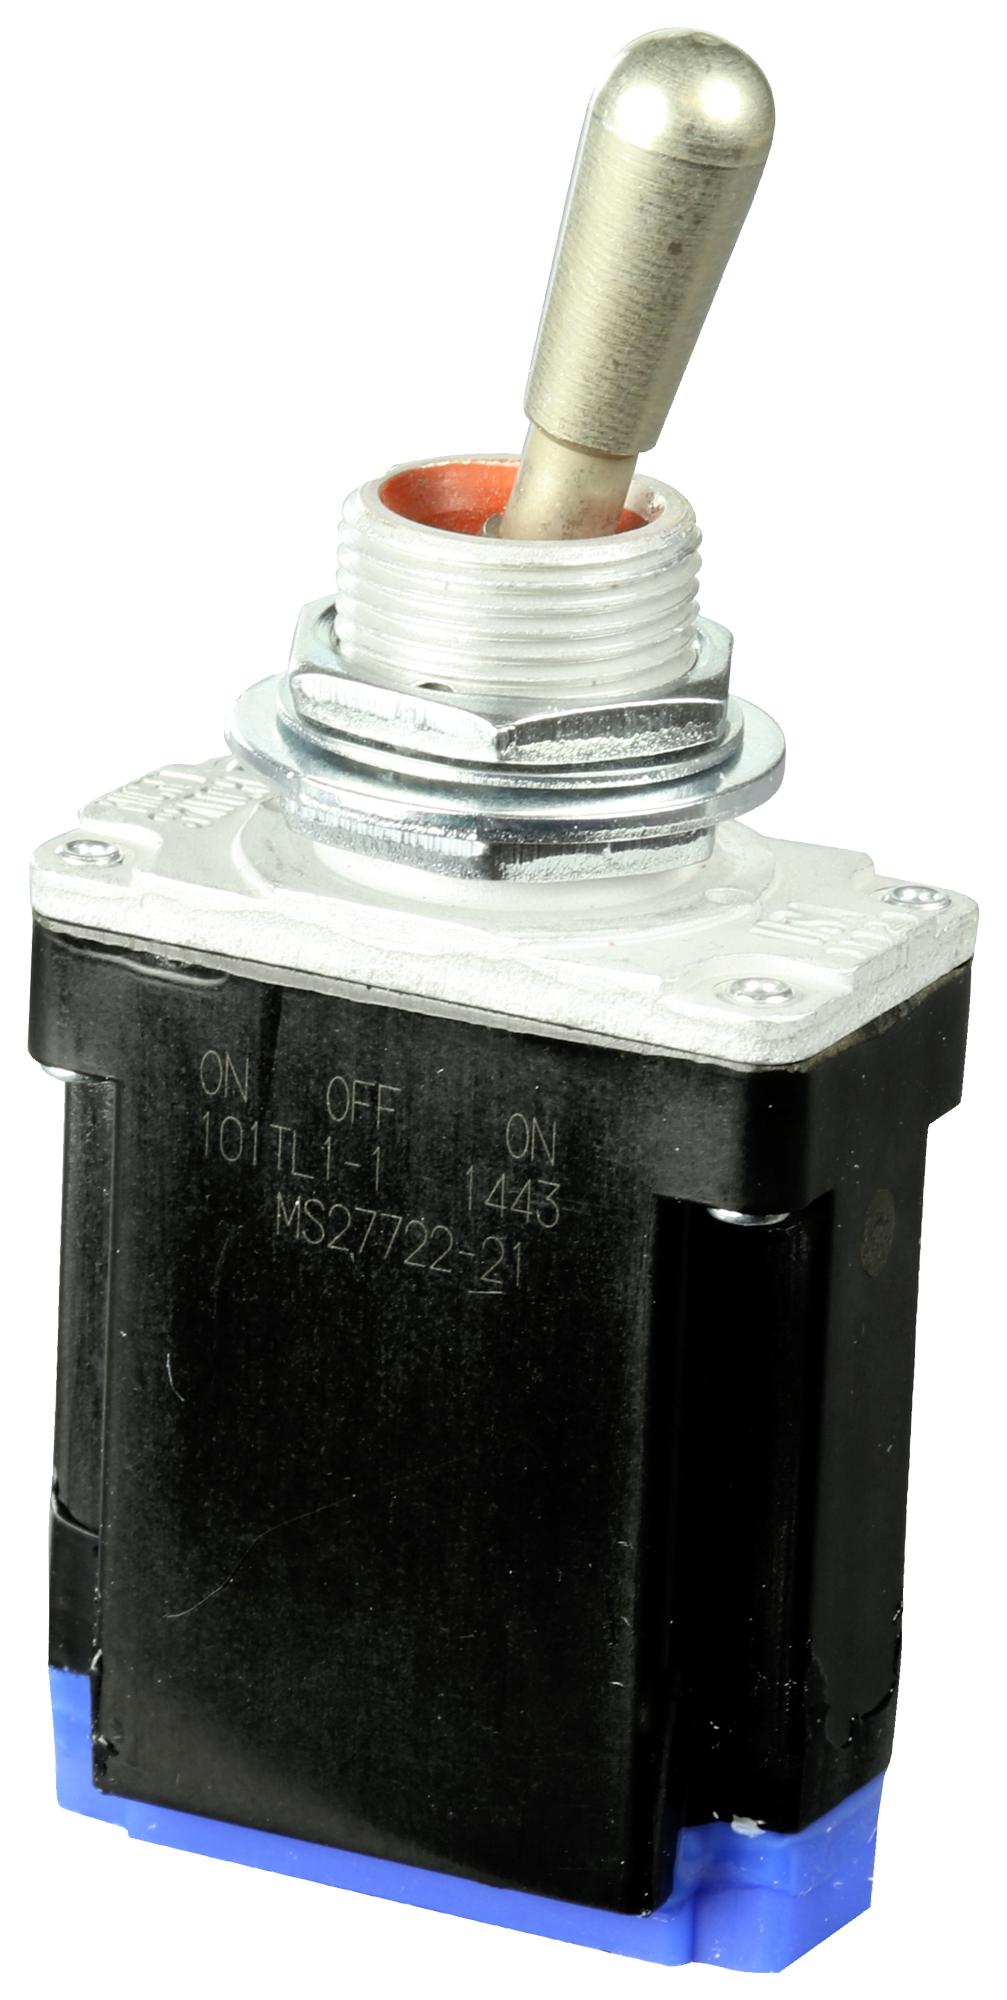 101TL1-1 TOGGLE SWITCH, SPDT, 20A, 28VDC, PANEL HONEYWELL